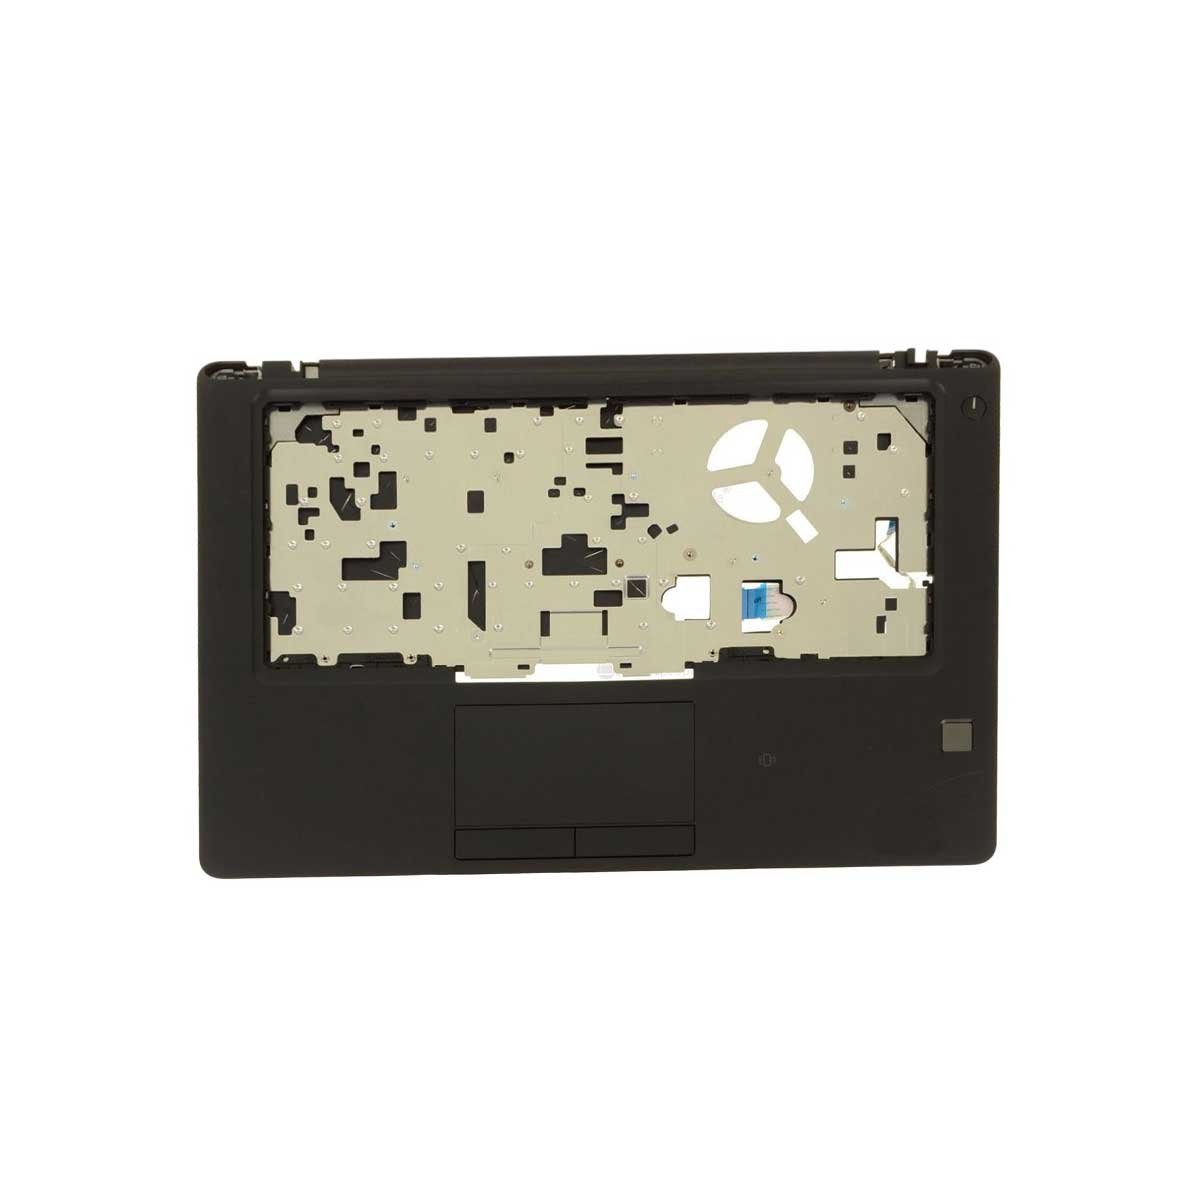 Dell Latitude 5490 5491 5495 OEM Palmrest Touchpad Assembly With Fingerprint Reader P/N JXR8G, A174S6